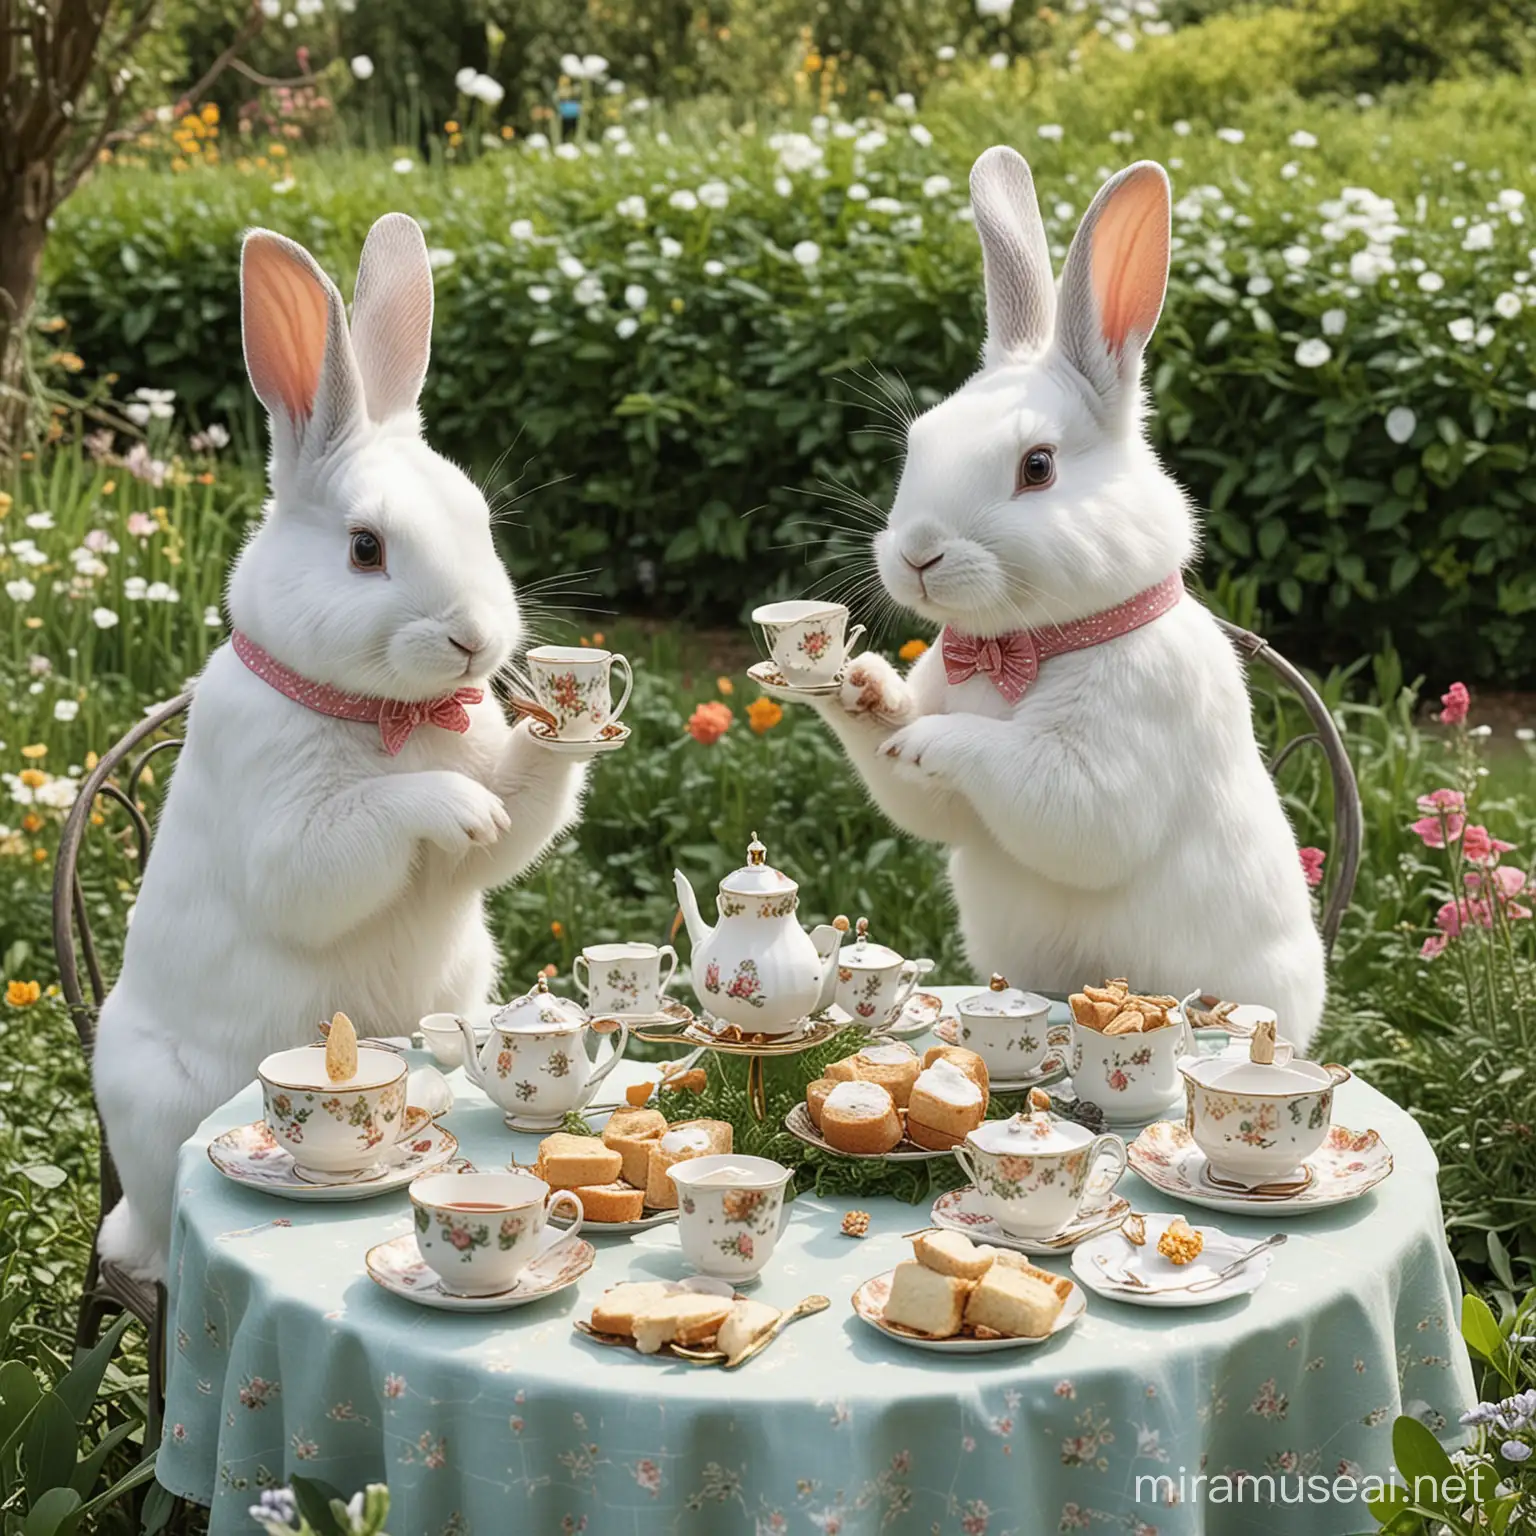 🐰☕ Time for tea, bunny style! Join us in the garden as our elegant rabbits sip tea, nibble on treats, and enjoy delightful conversation. Don't forget to mind your manners! #RabbitTeaParty #GardenGatherings